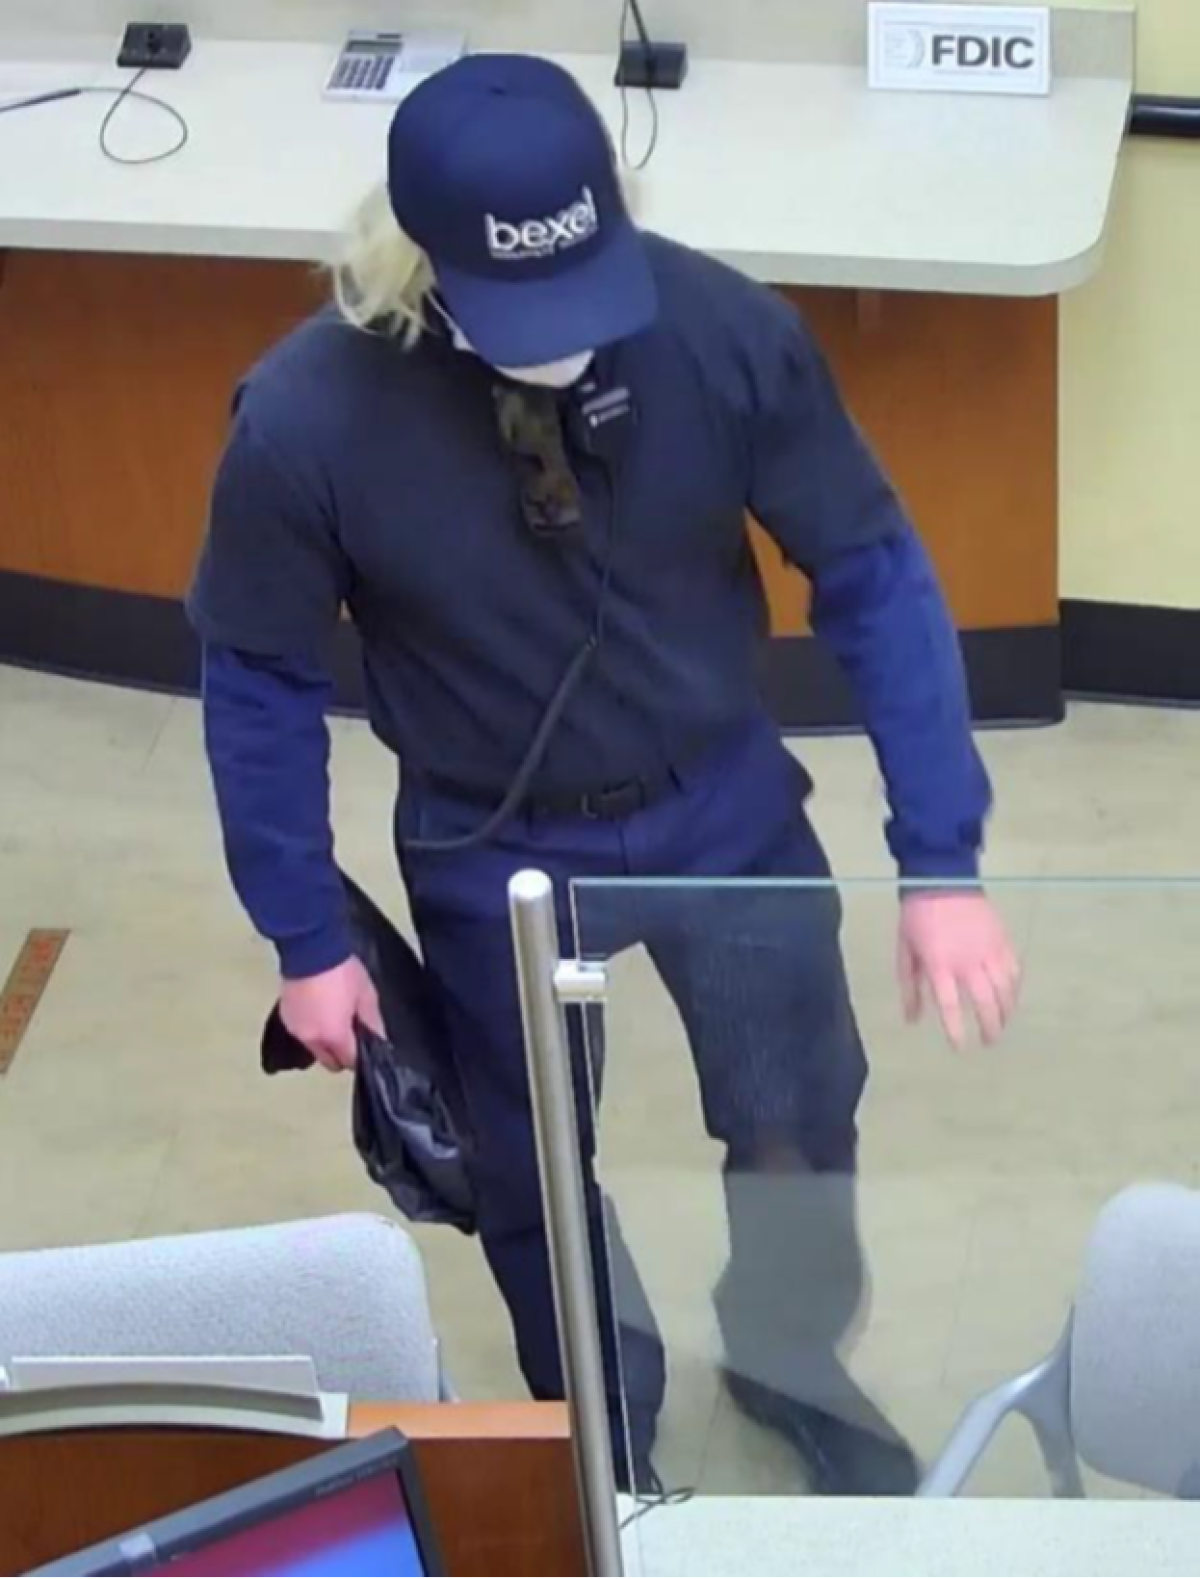 Authorities asked the public to help identify a man who they say robbed a bank teller in Scripps Ranch on Monday morning.